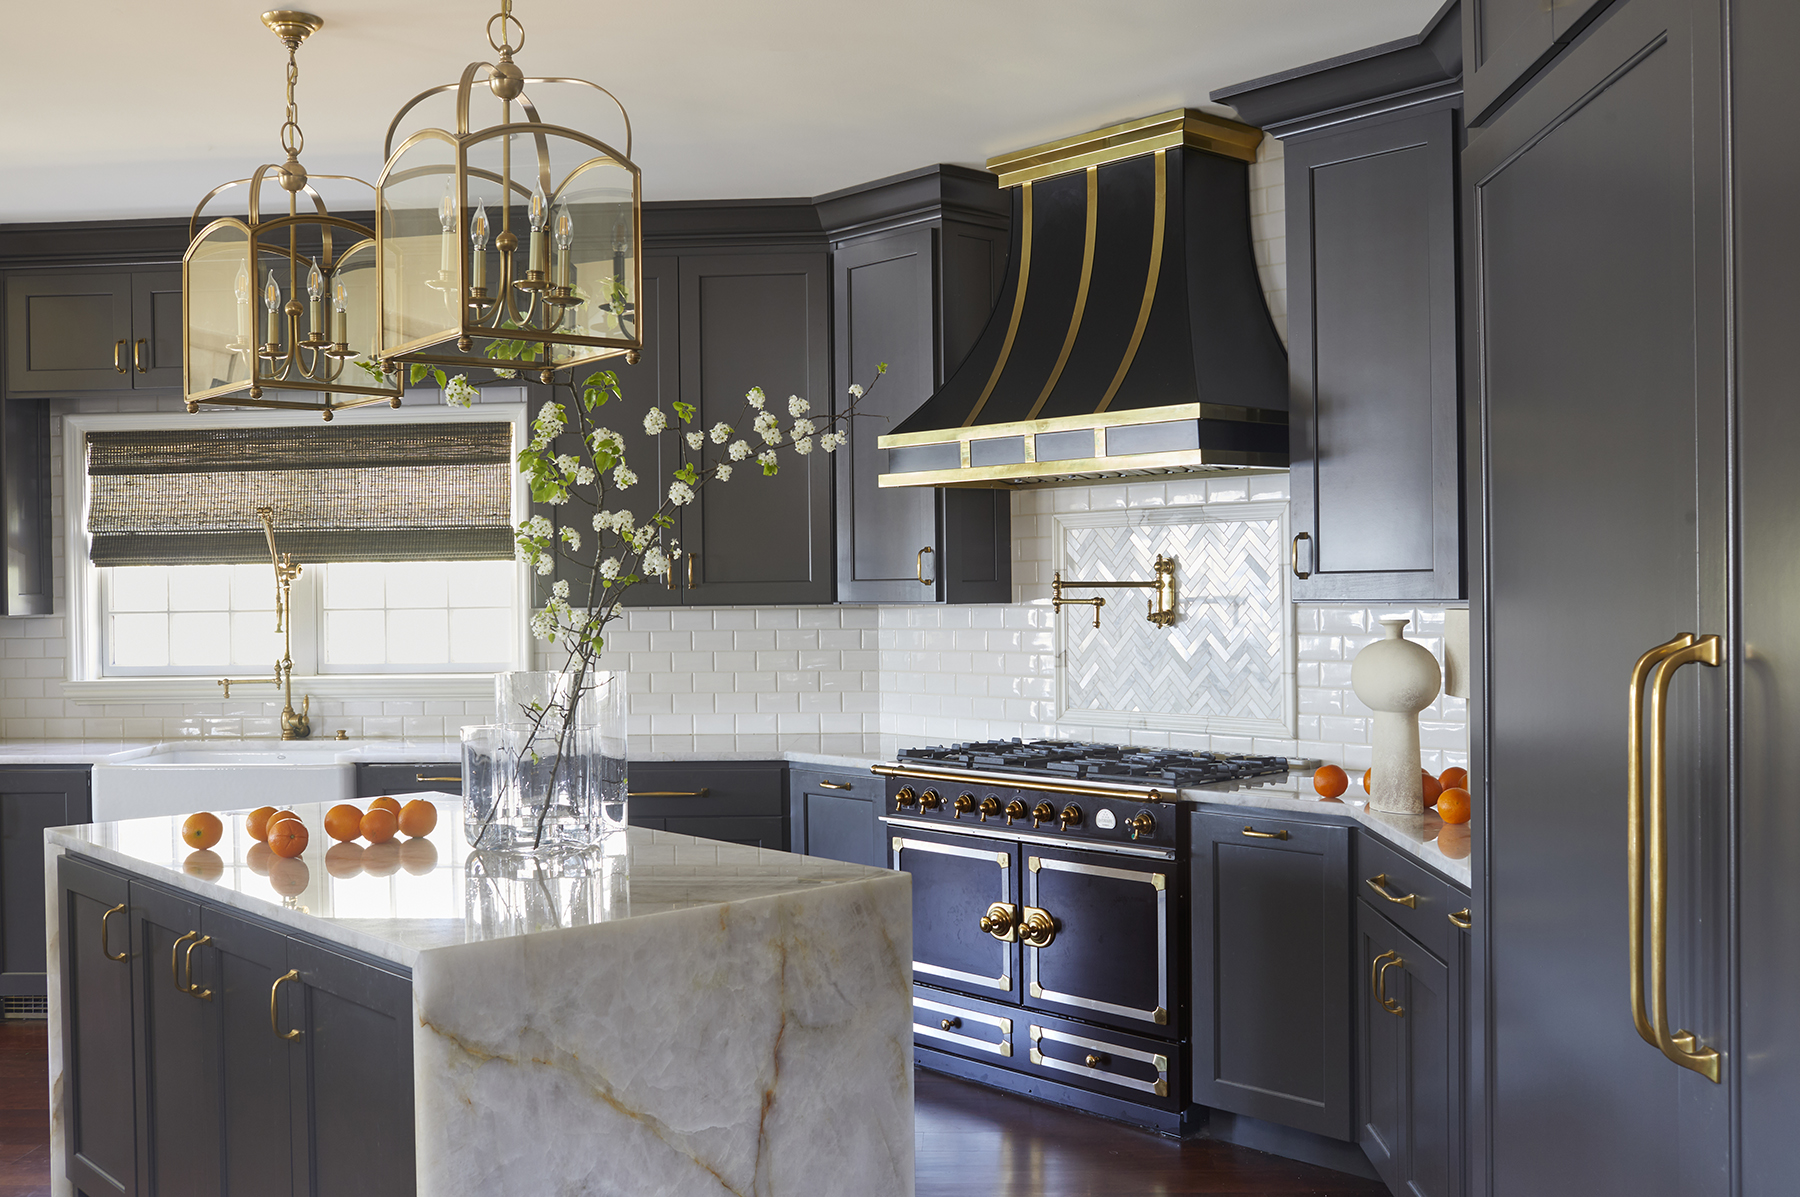 Dark upper and lower kitchen cabinets with gold hardware, a black stove/over and matching range hood with gold accents contrasted by a white marble kitchen island with gold veins.